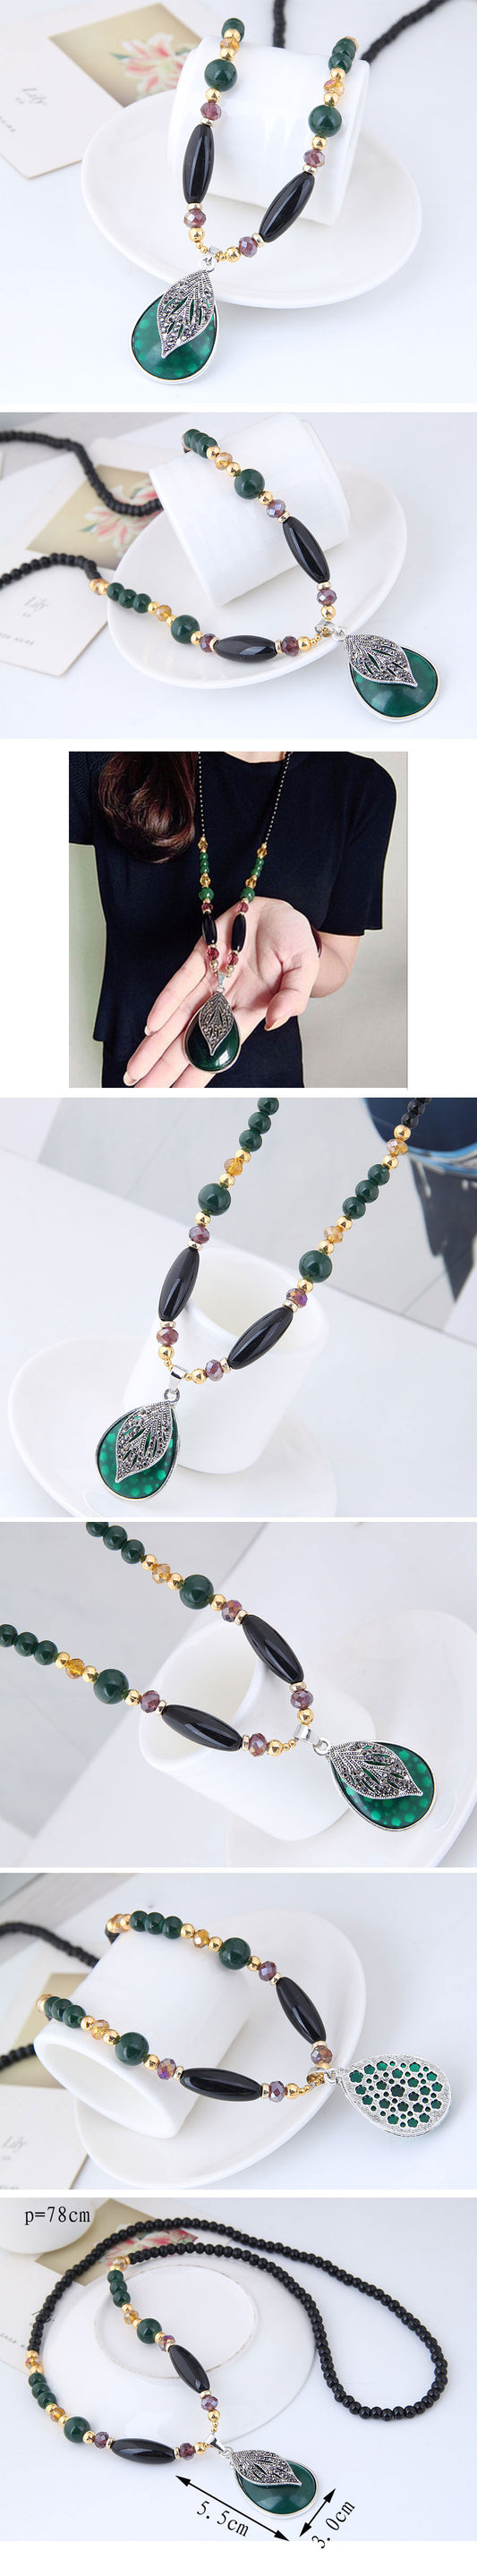 Simple Accessories Water Drop Wild Colorful Black Beads Temperament Long Chain / Sweater Chain